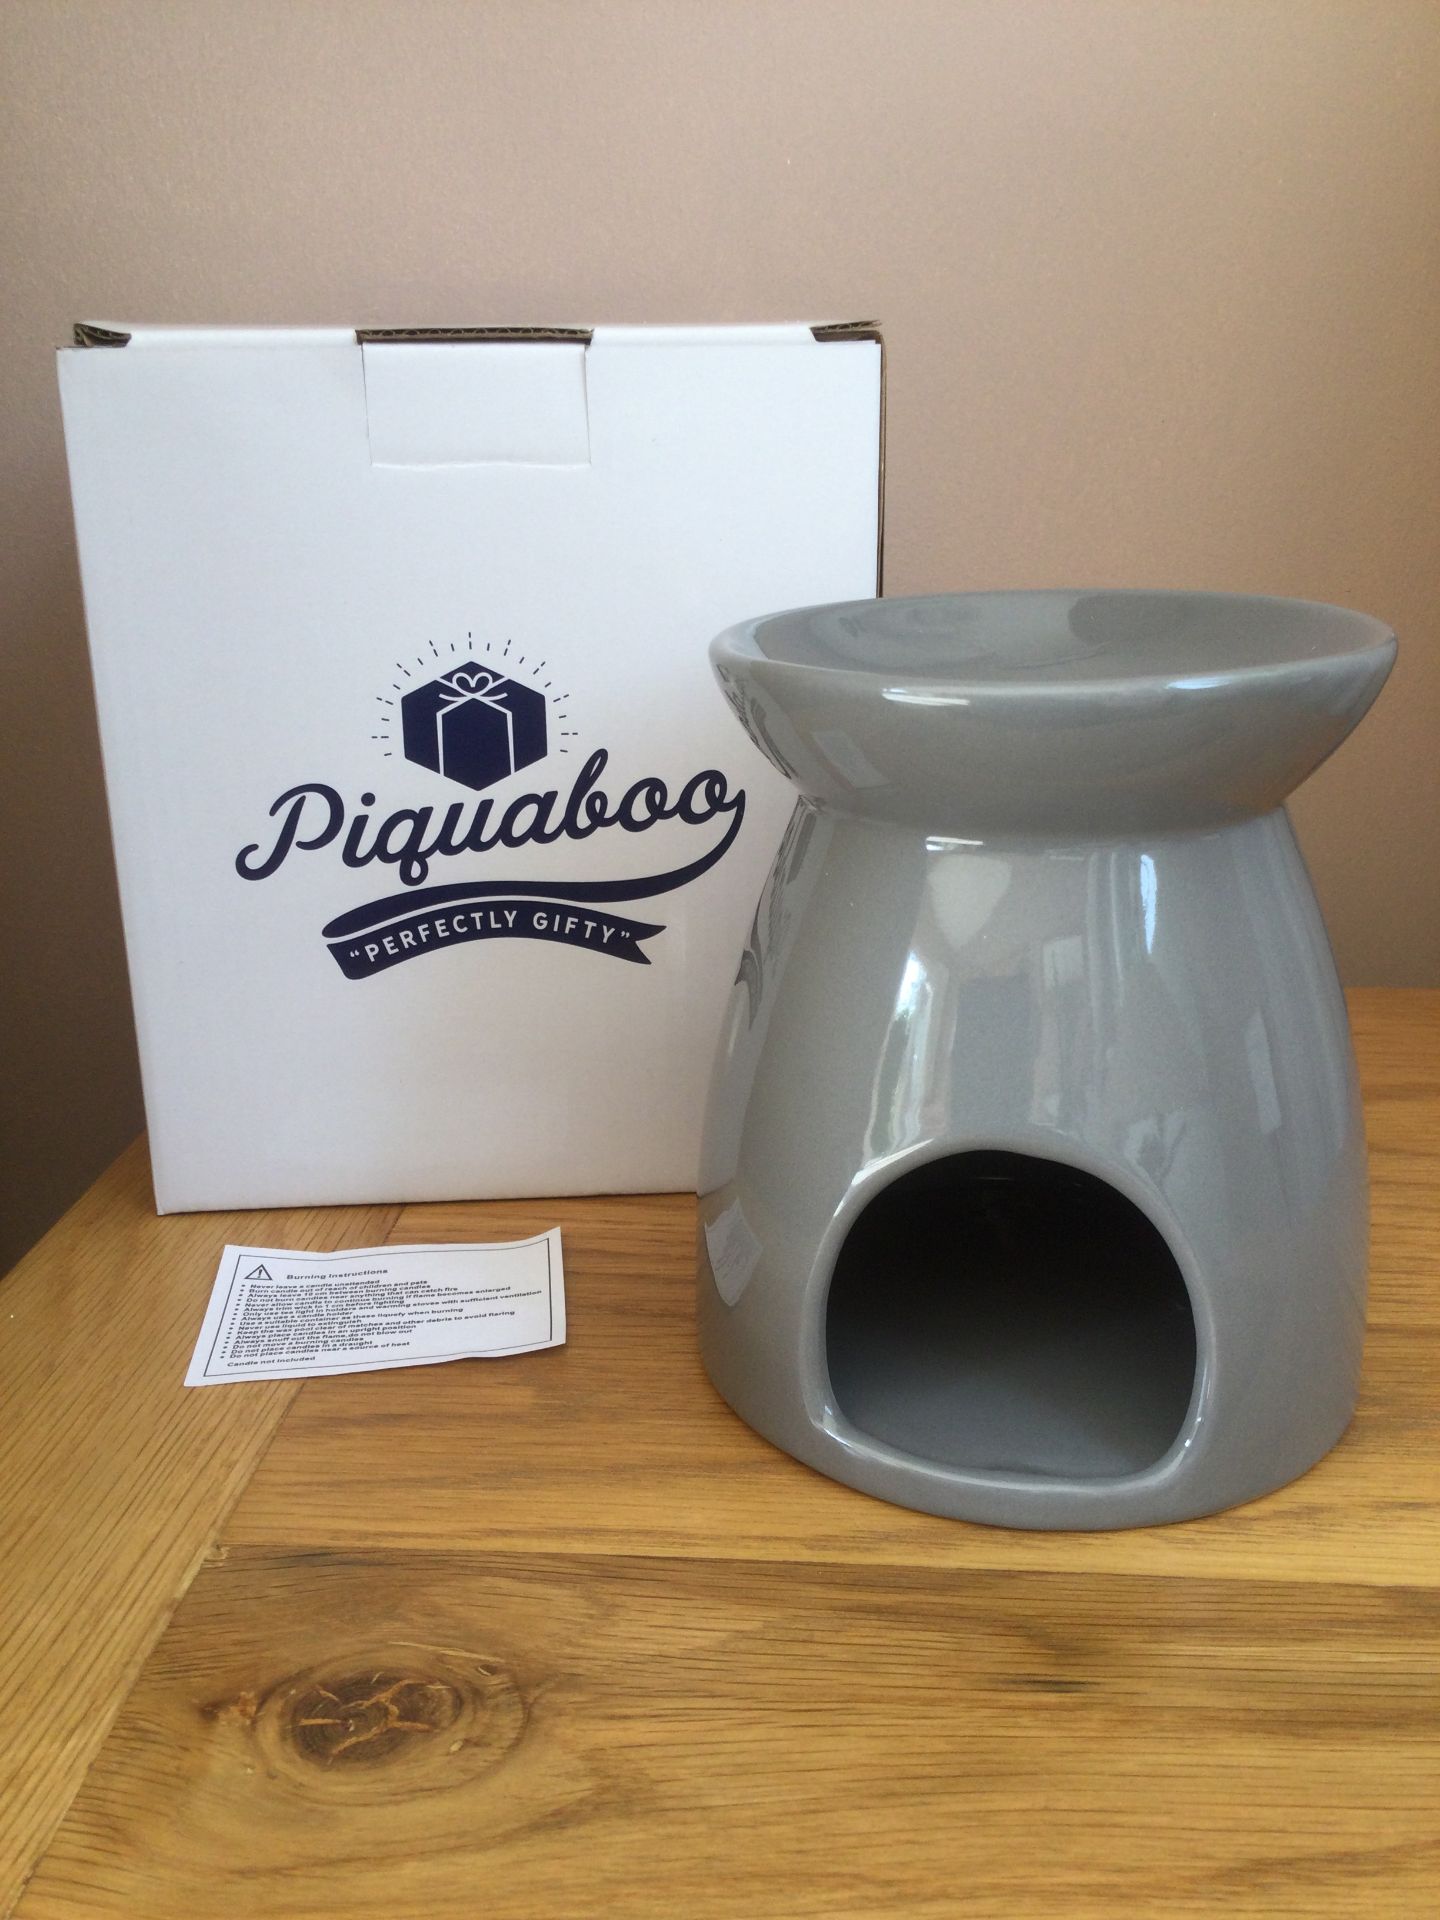 Piquaboo Large “White Heart” Ceramic Oil Burner Height 13cm, New With Gift Box - Image 3 of 4